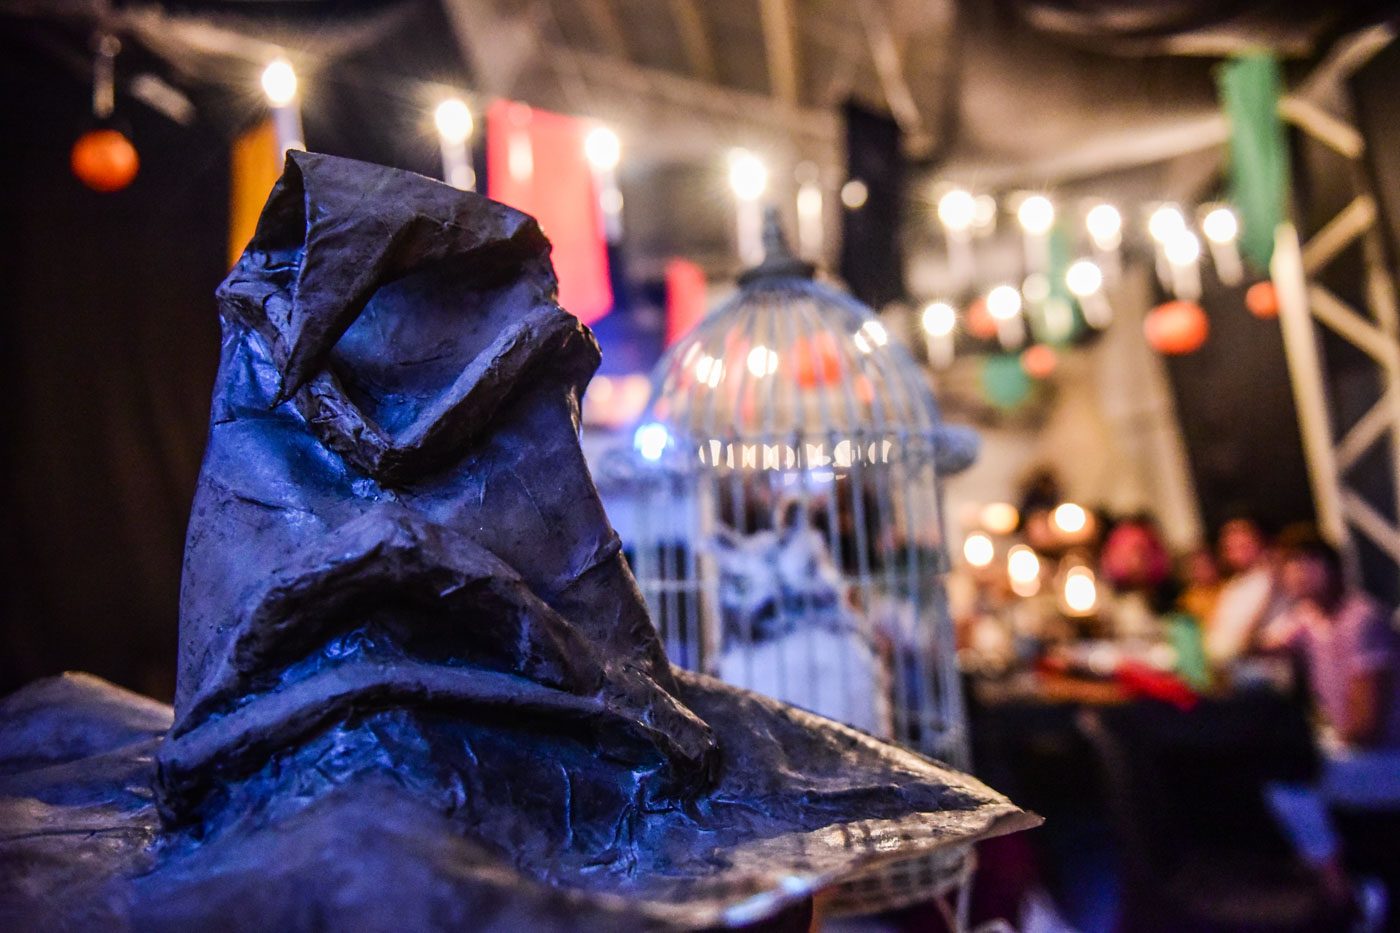 This Harry Potter feast will take you straight to Hogwarts